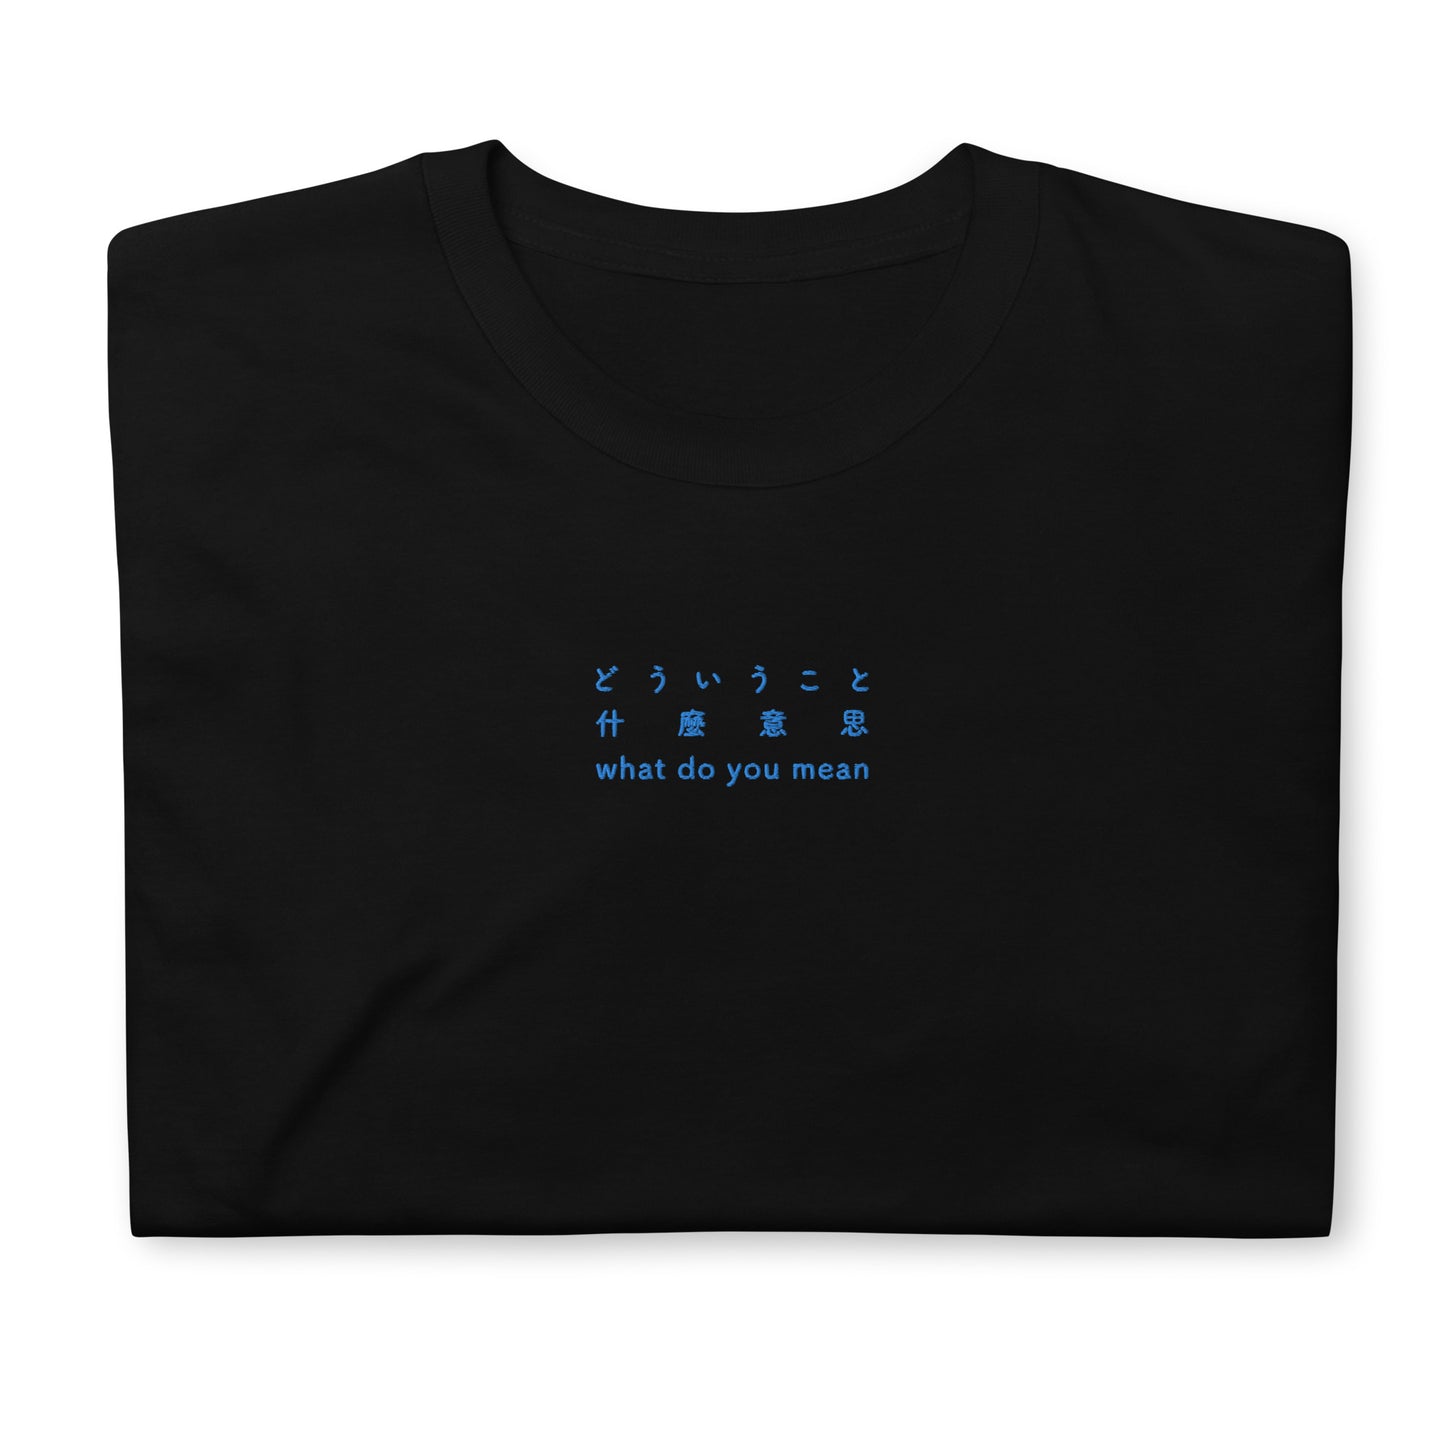 Black High Quality Tee - Front Design with an Blue Embroidery "What Do You Mean" in Japanese, Chinese and English